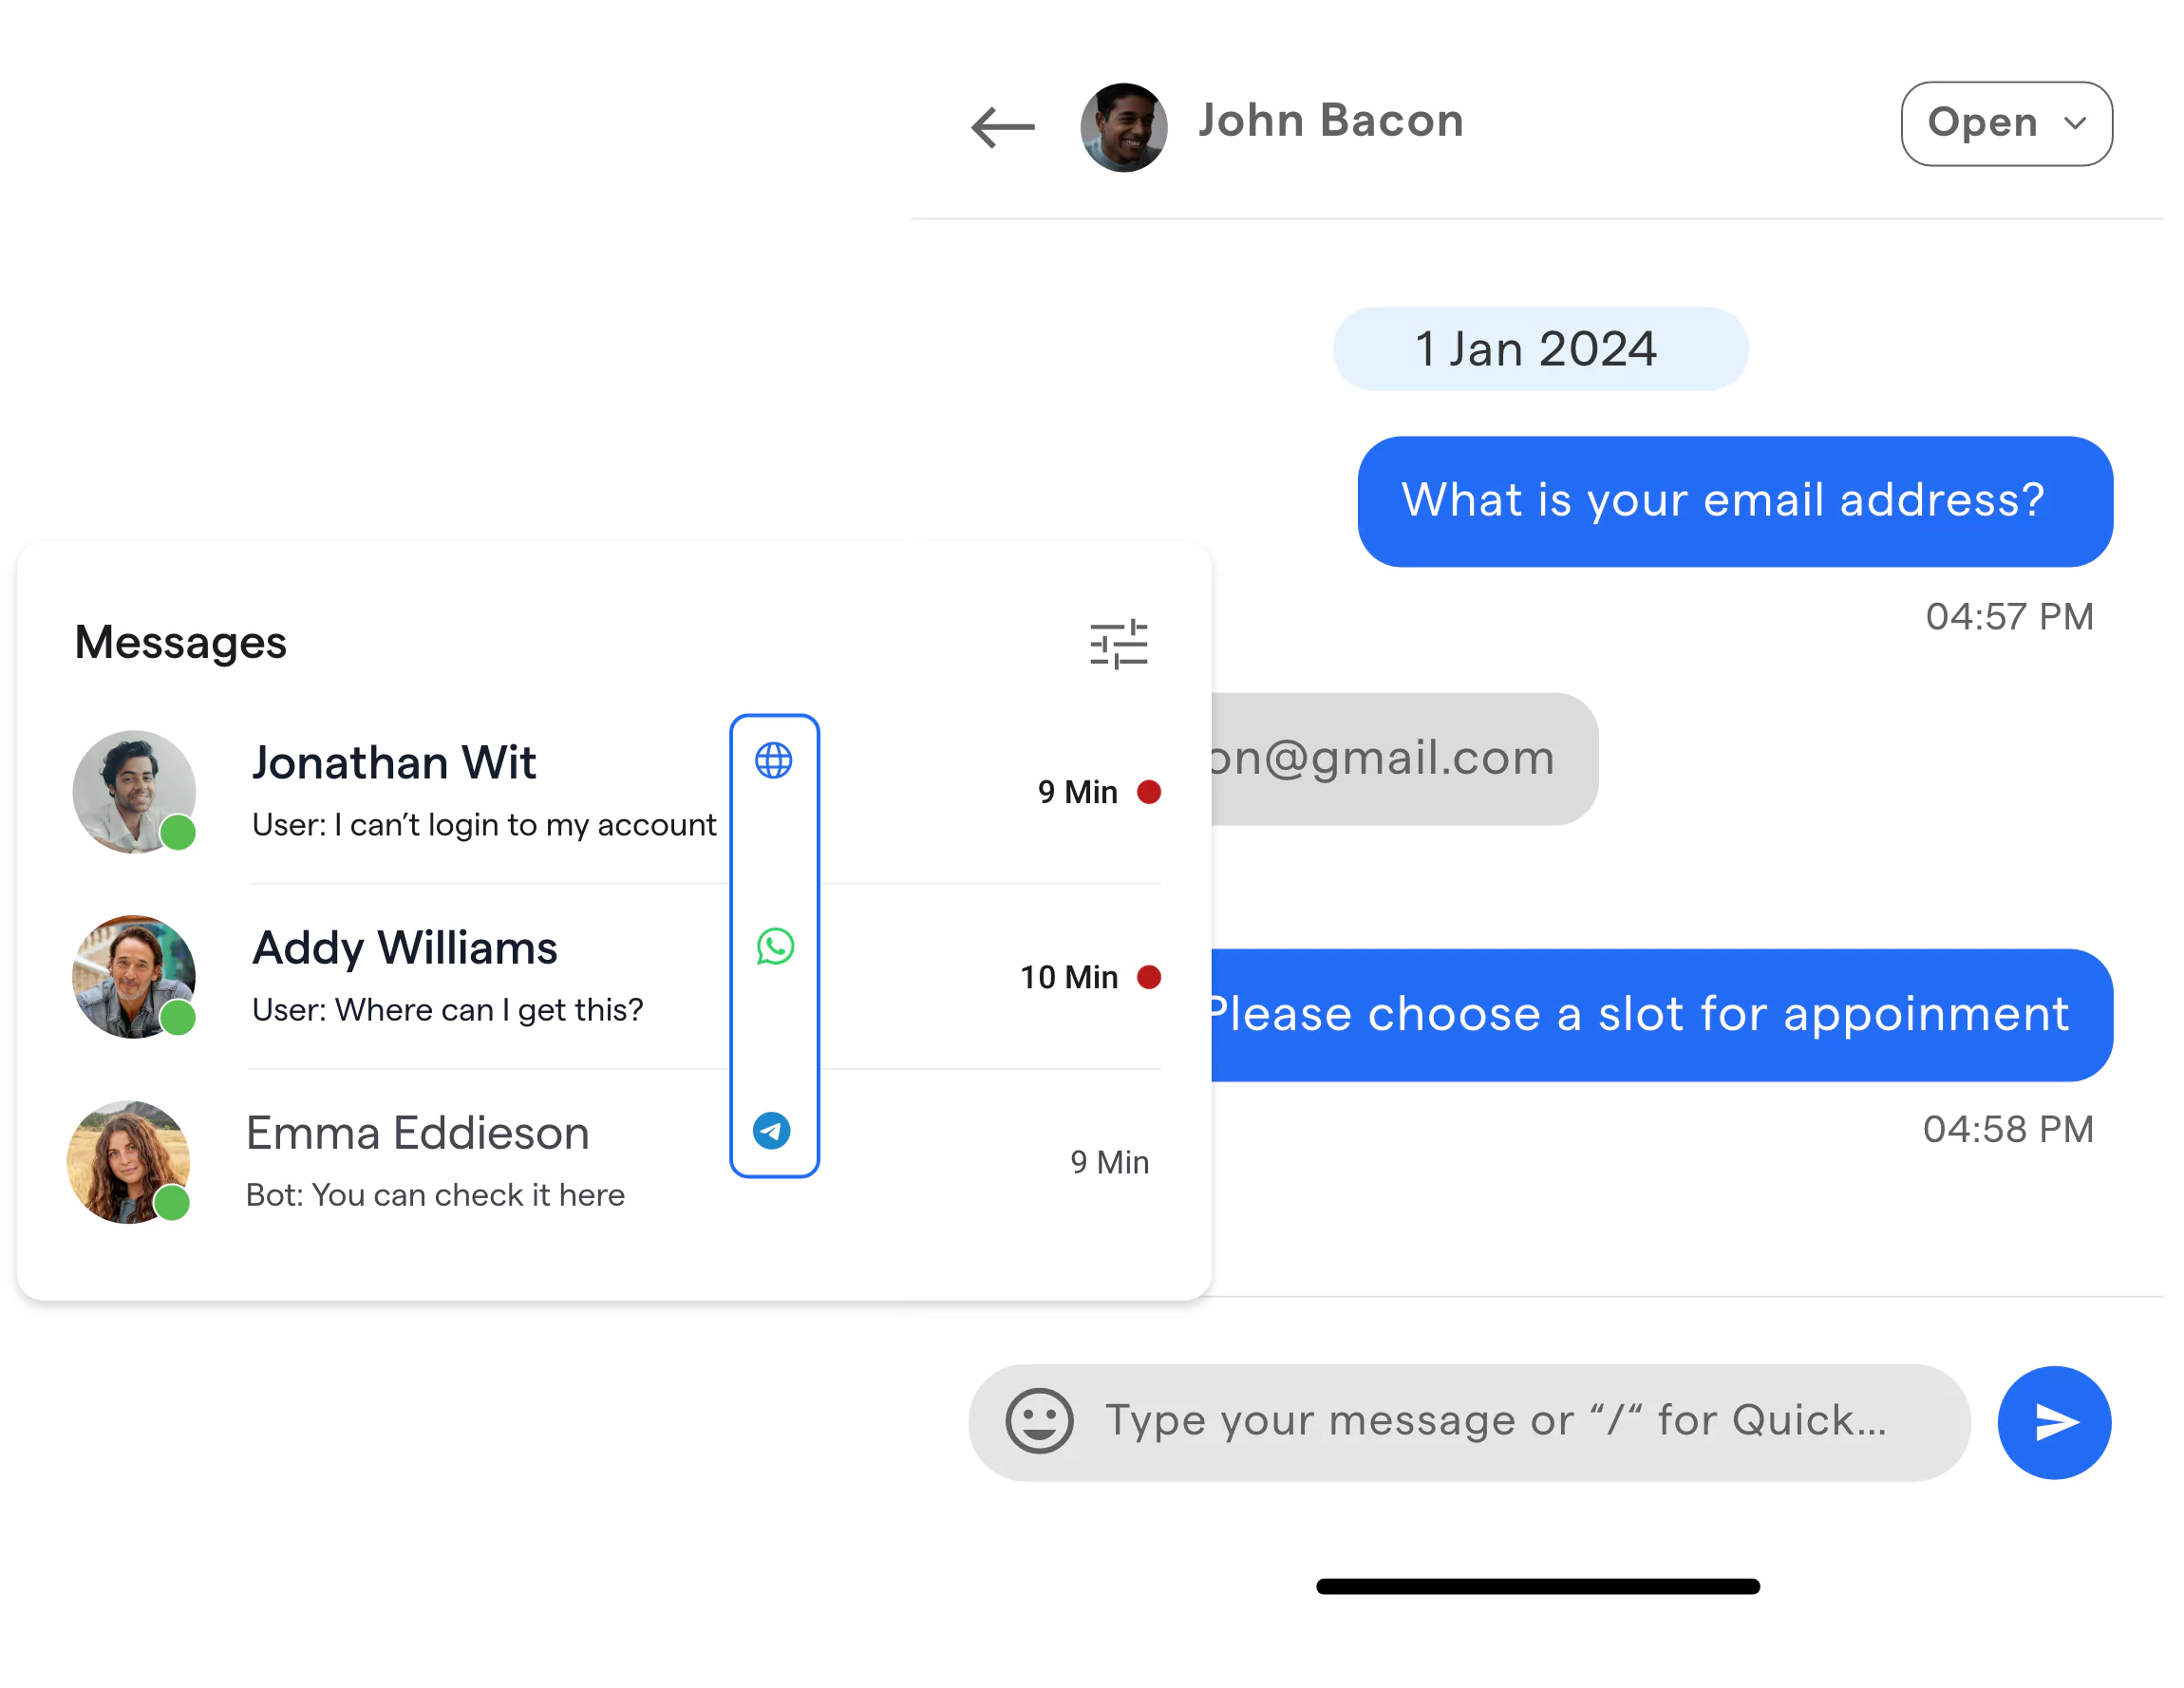 Benefits of Chatbots for customer inquiries